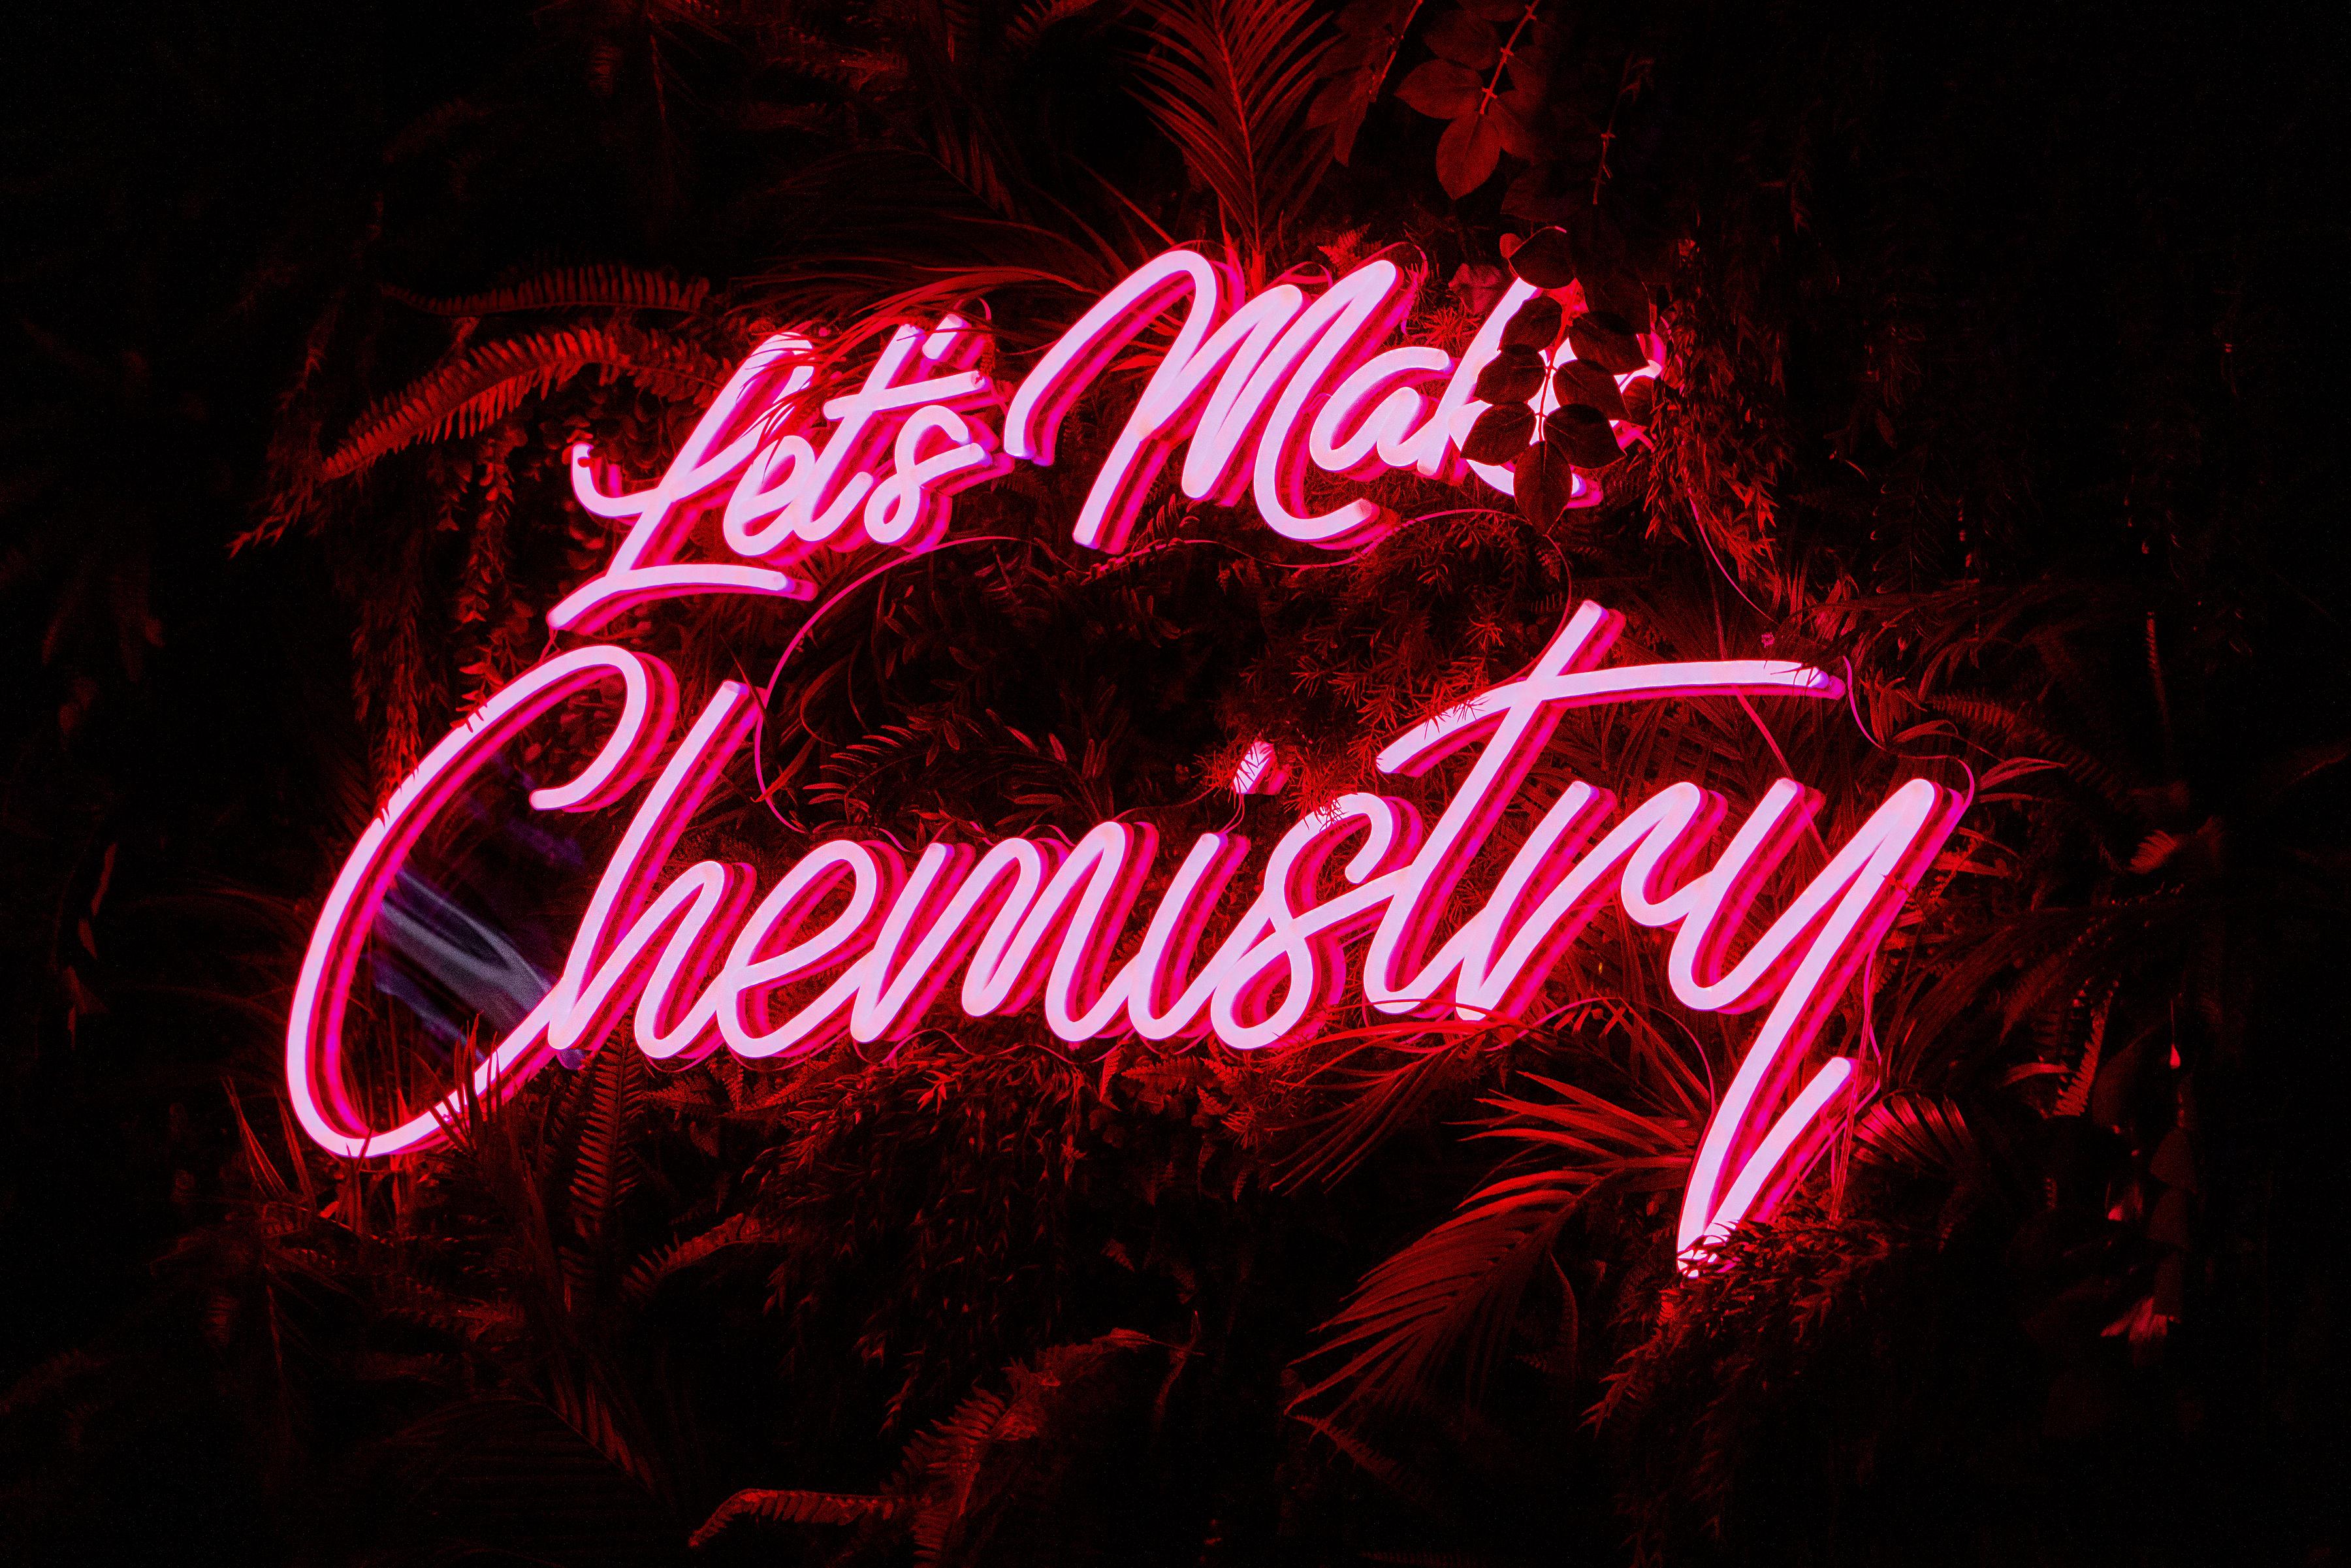 Let's Make Chemistry at Copper 29 Bar, every Friday Night!